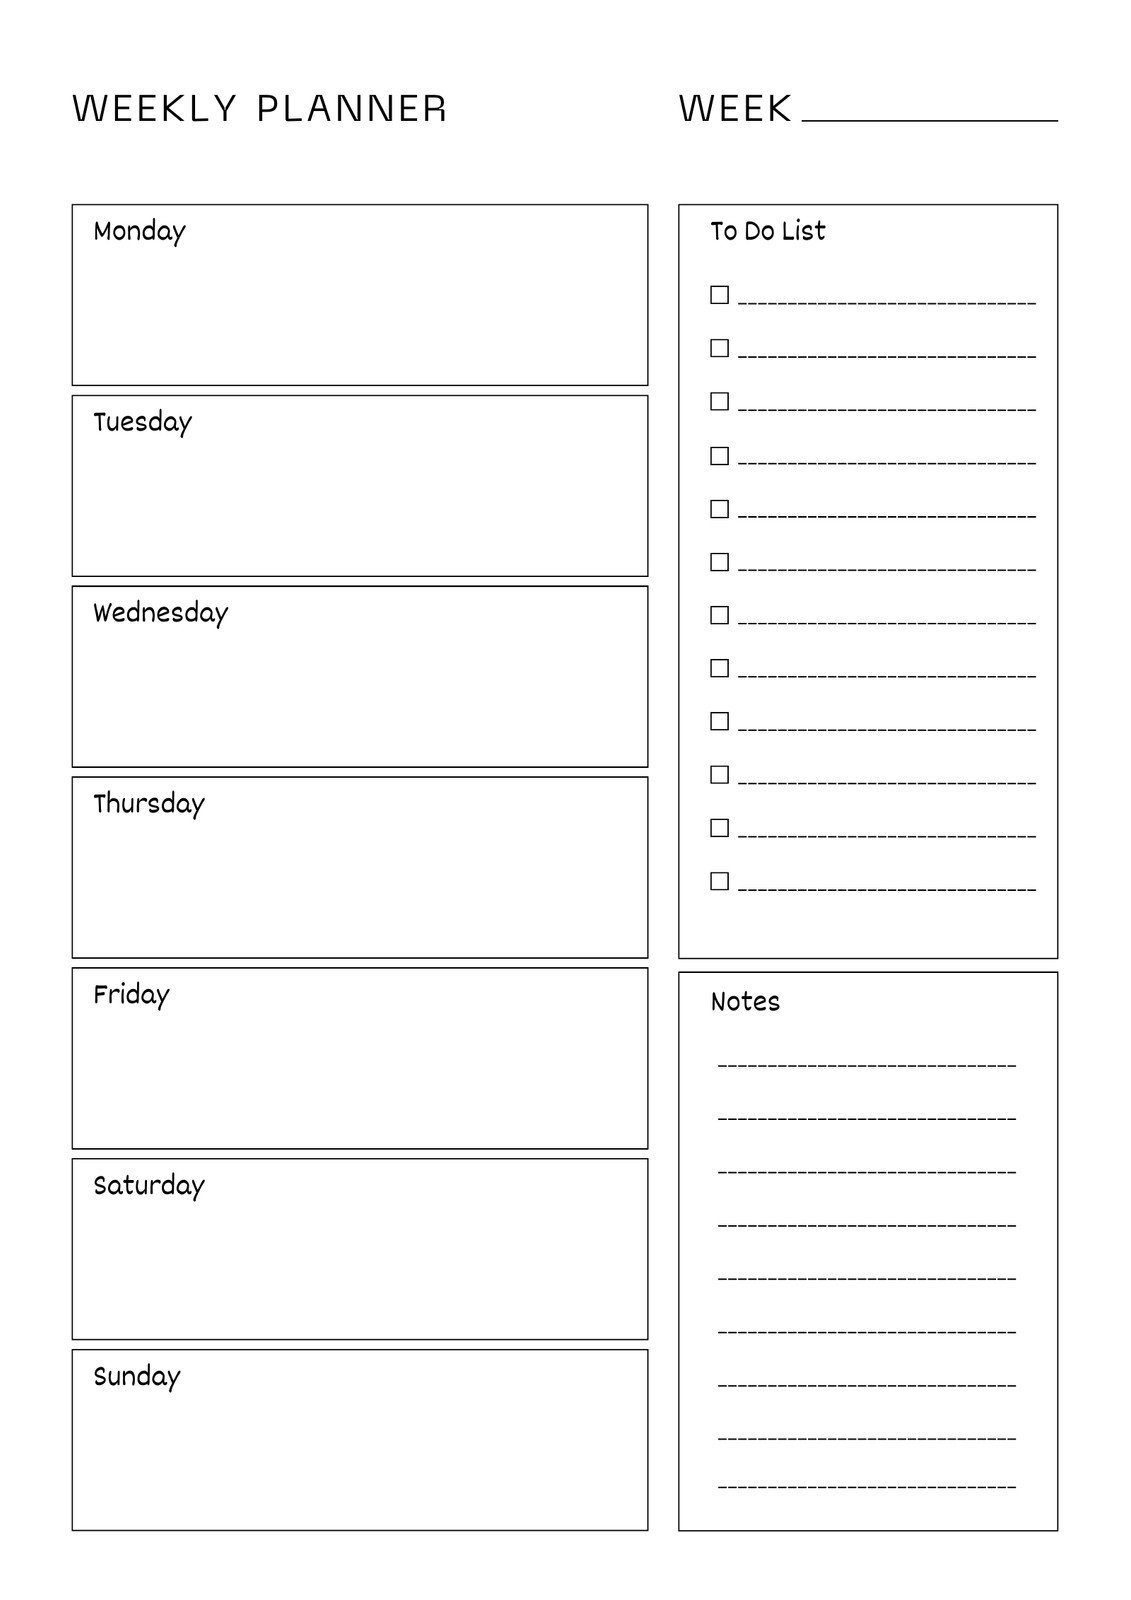 Weekly Planner: 30 minute intervals – Learning Center